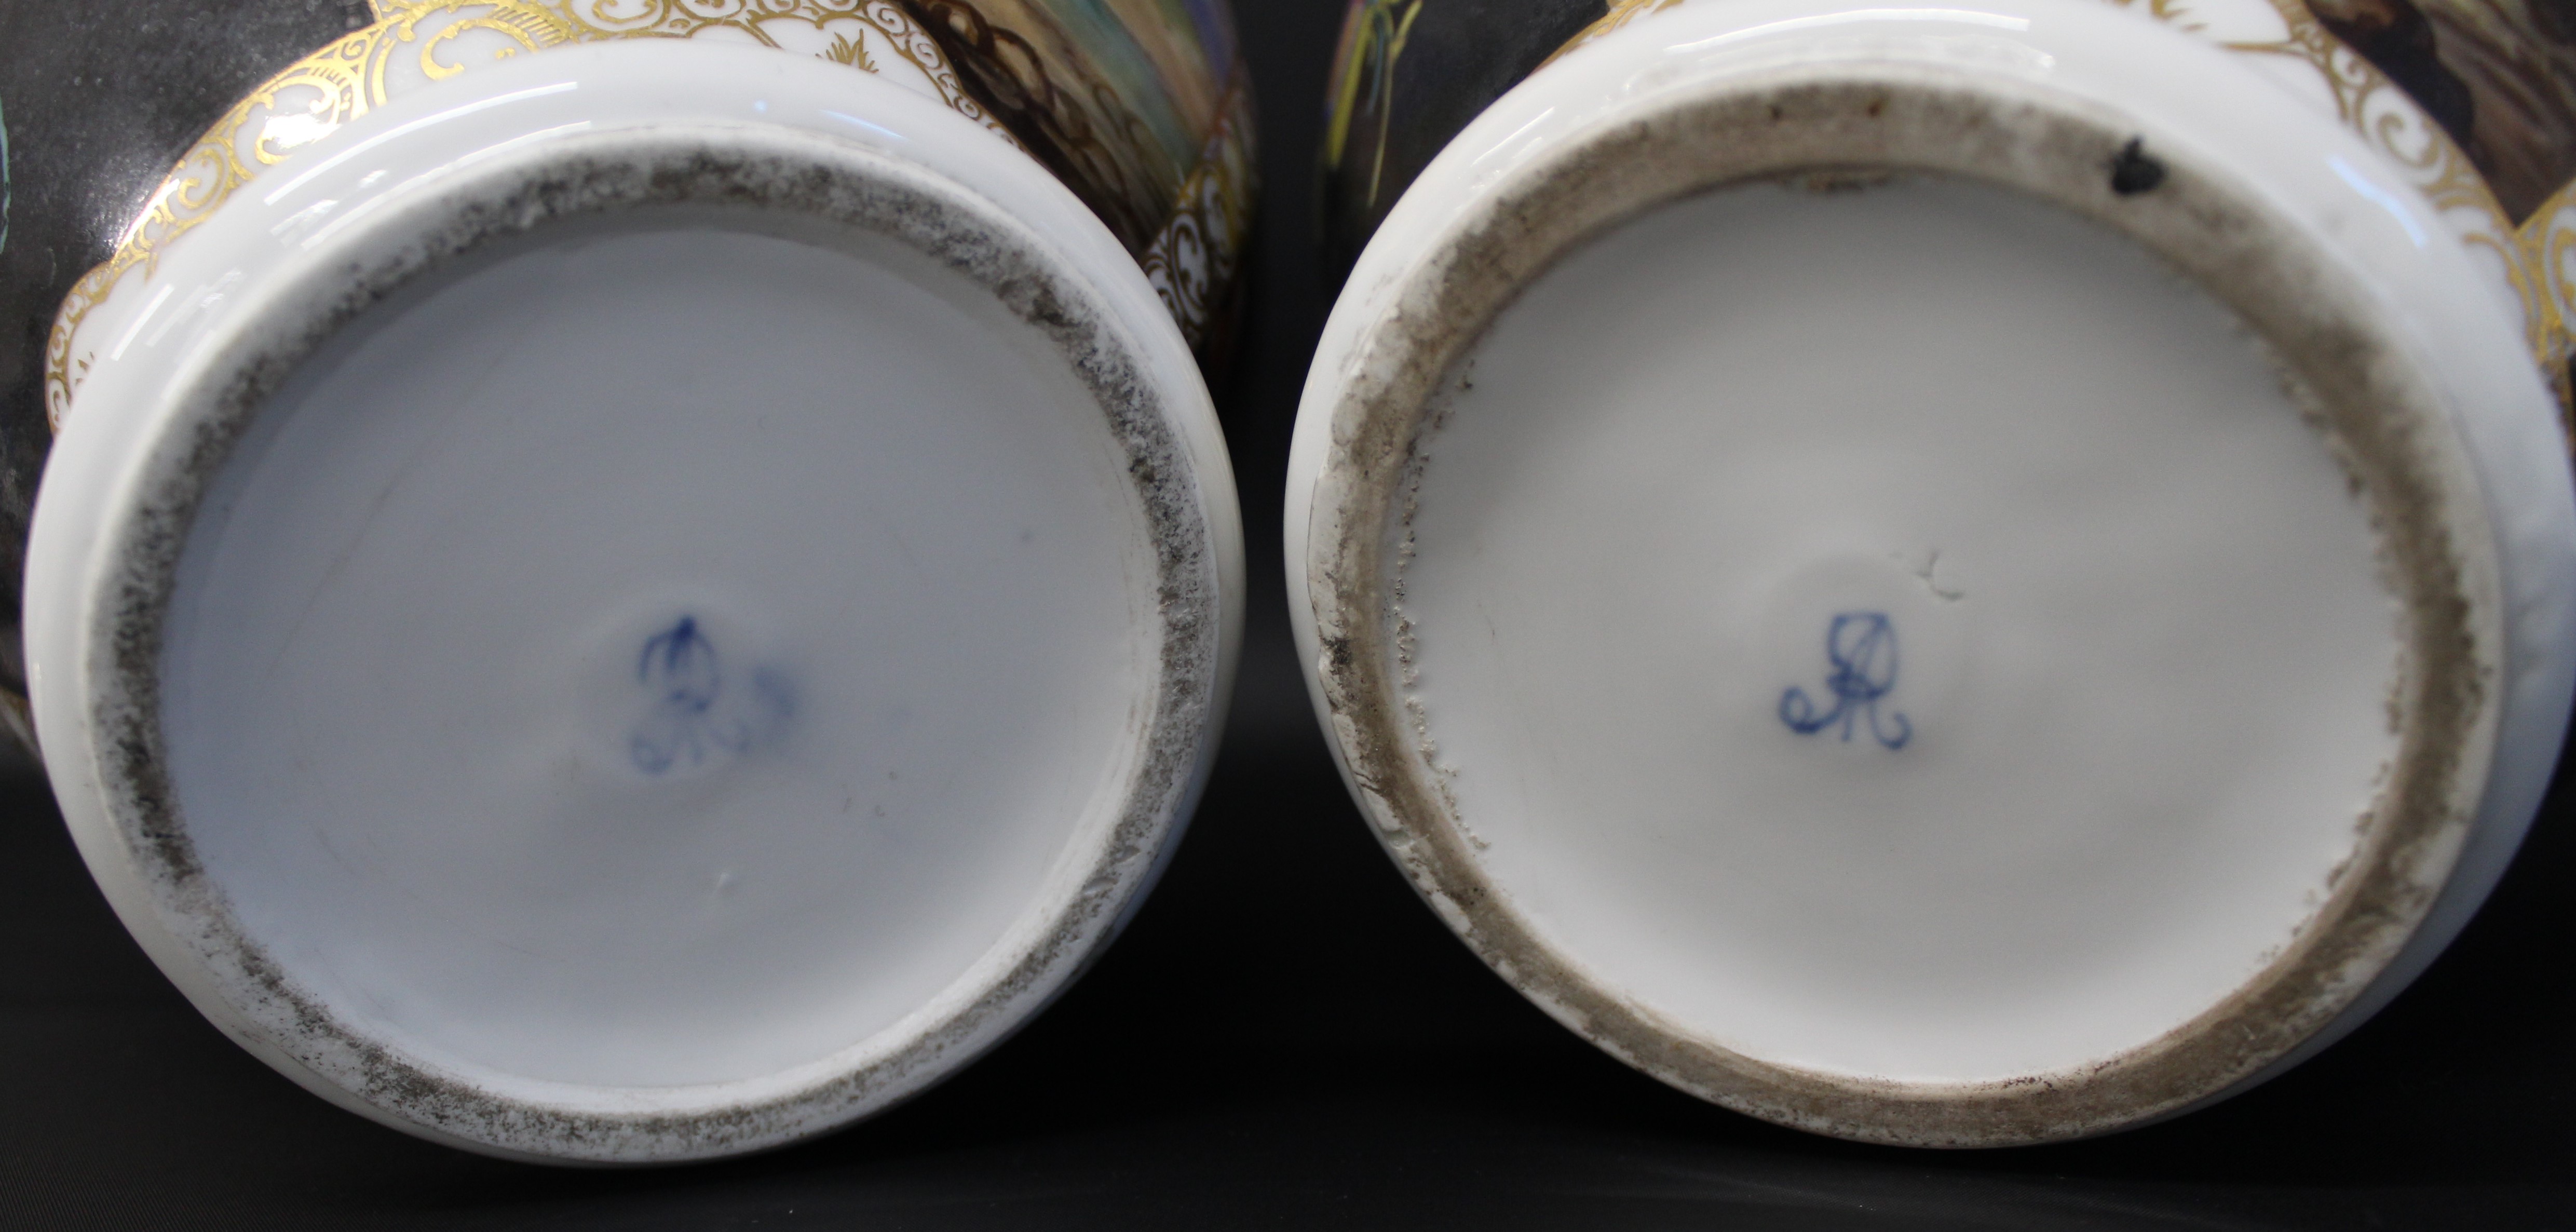 Pair of large 19th century Augustus Rex porcelain jars and covers, each with polychrome decoration - Image 9 of 9